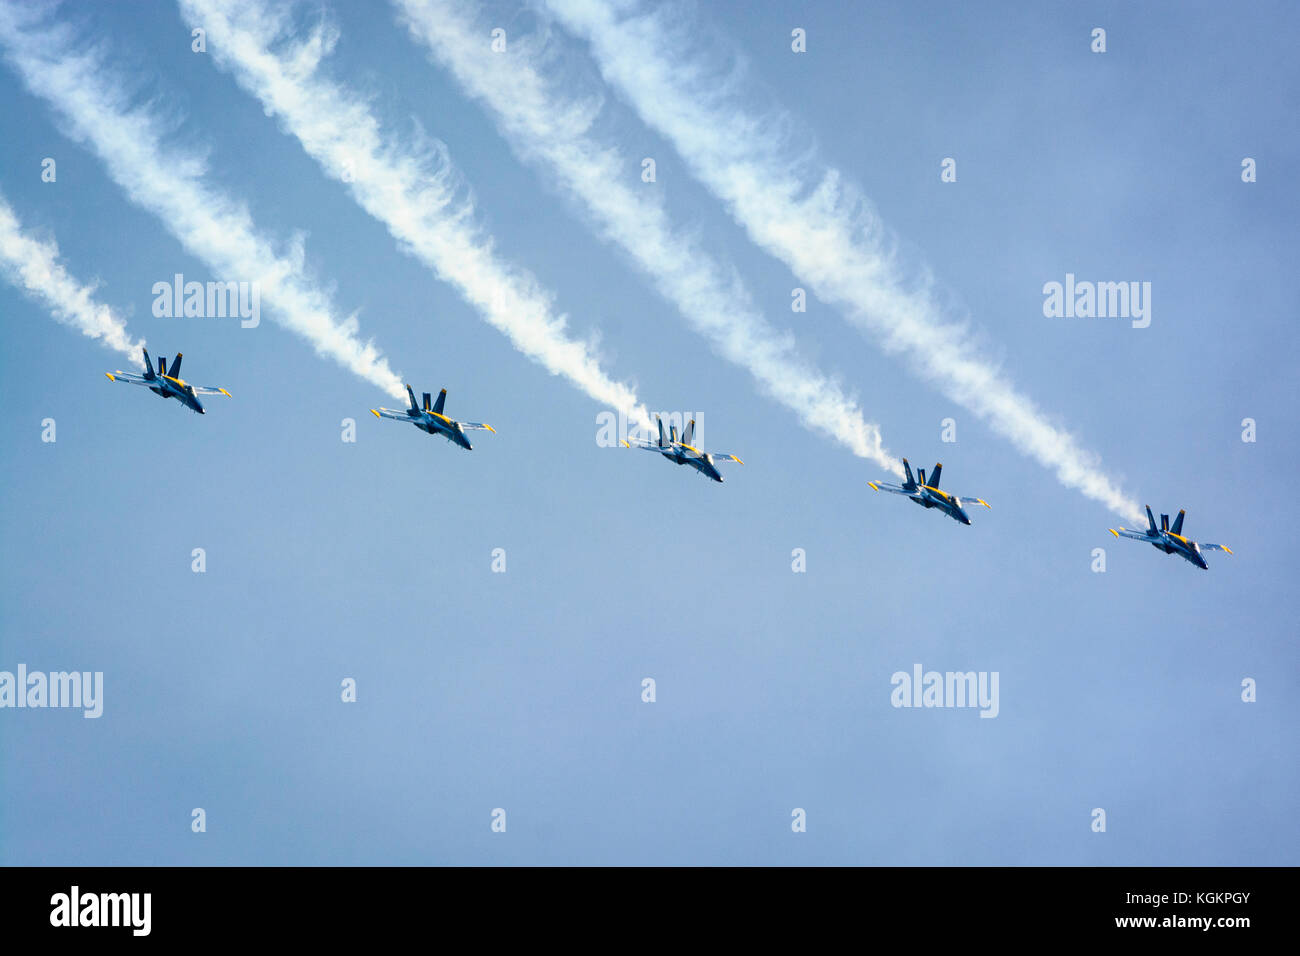 The United States Navy precision flying team, the Blue Angles perform over the skies of Annapolis, Maryland. Stock Photo